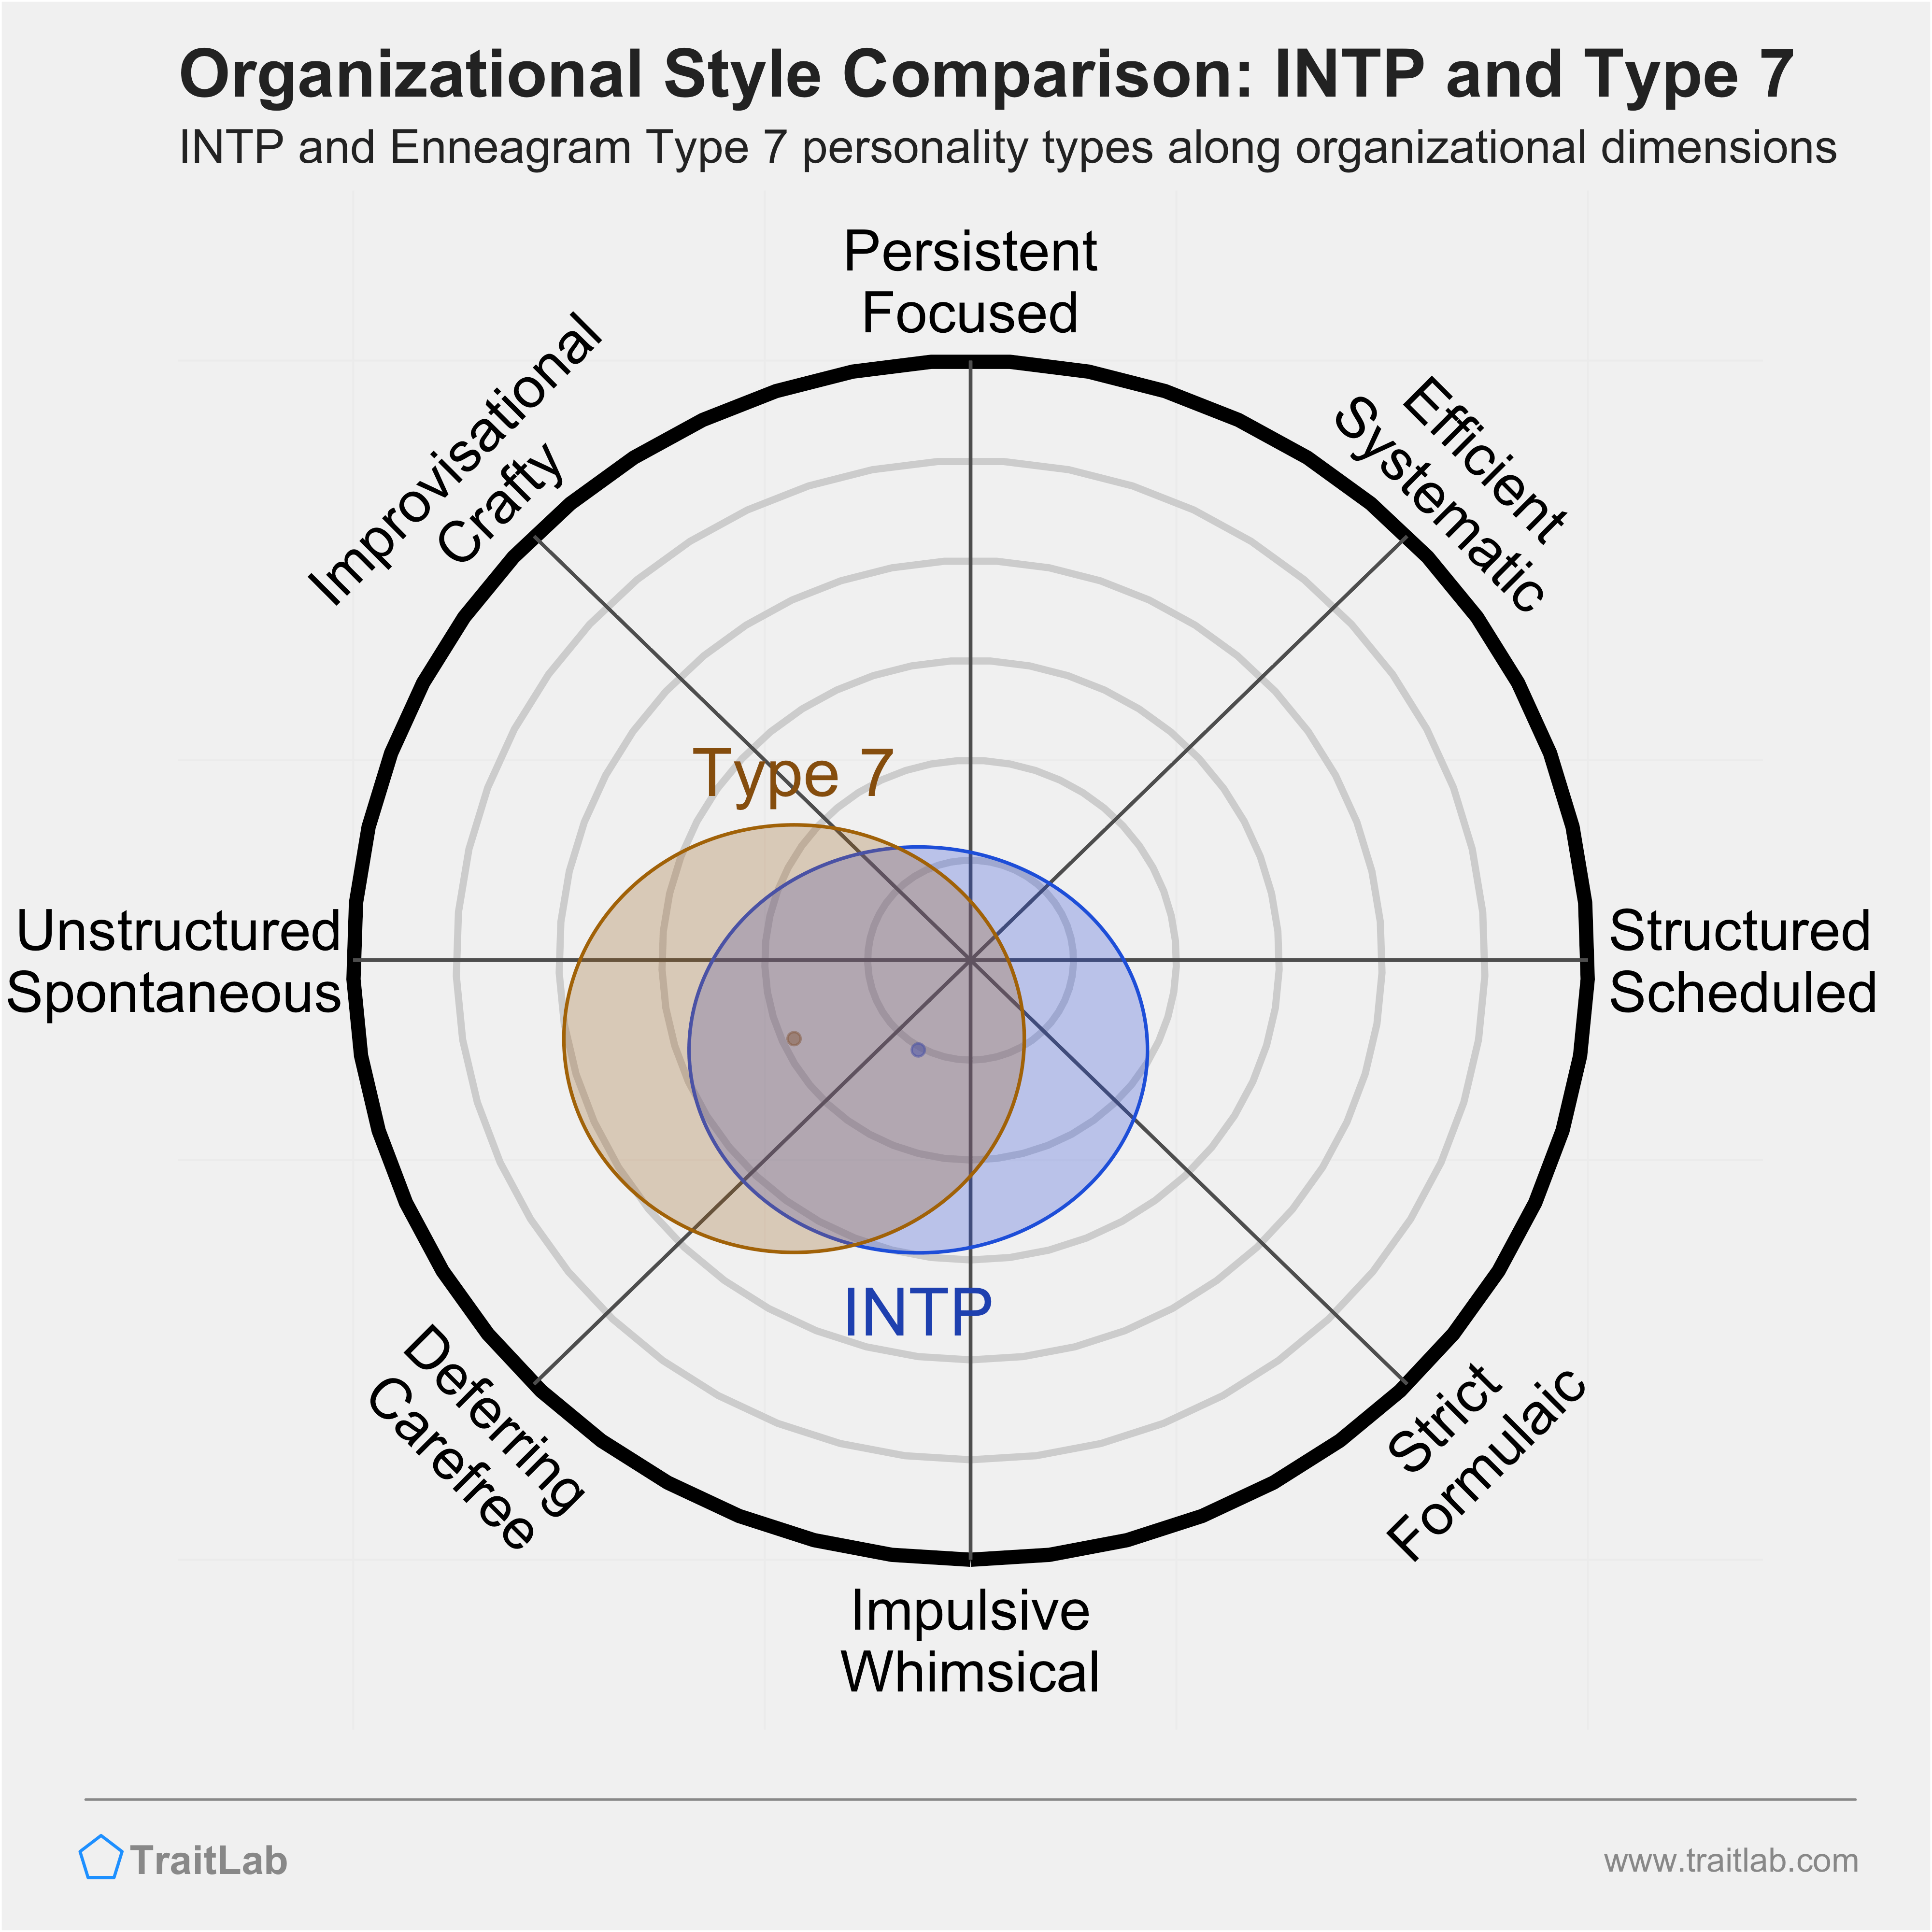 INTP and Type 7 comparison across organizational dimensions